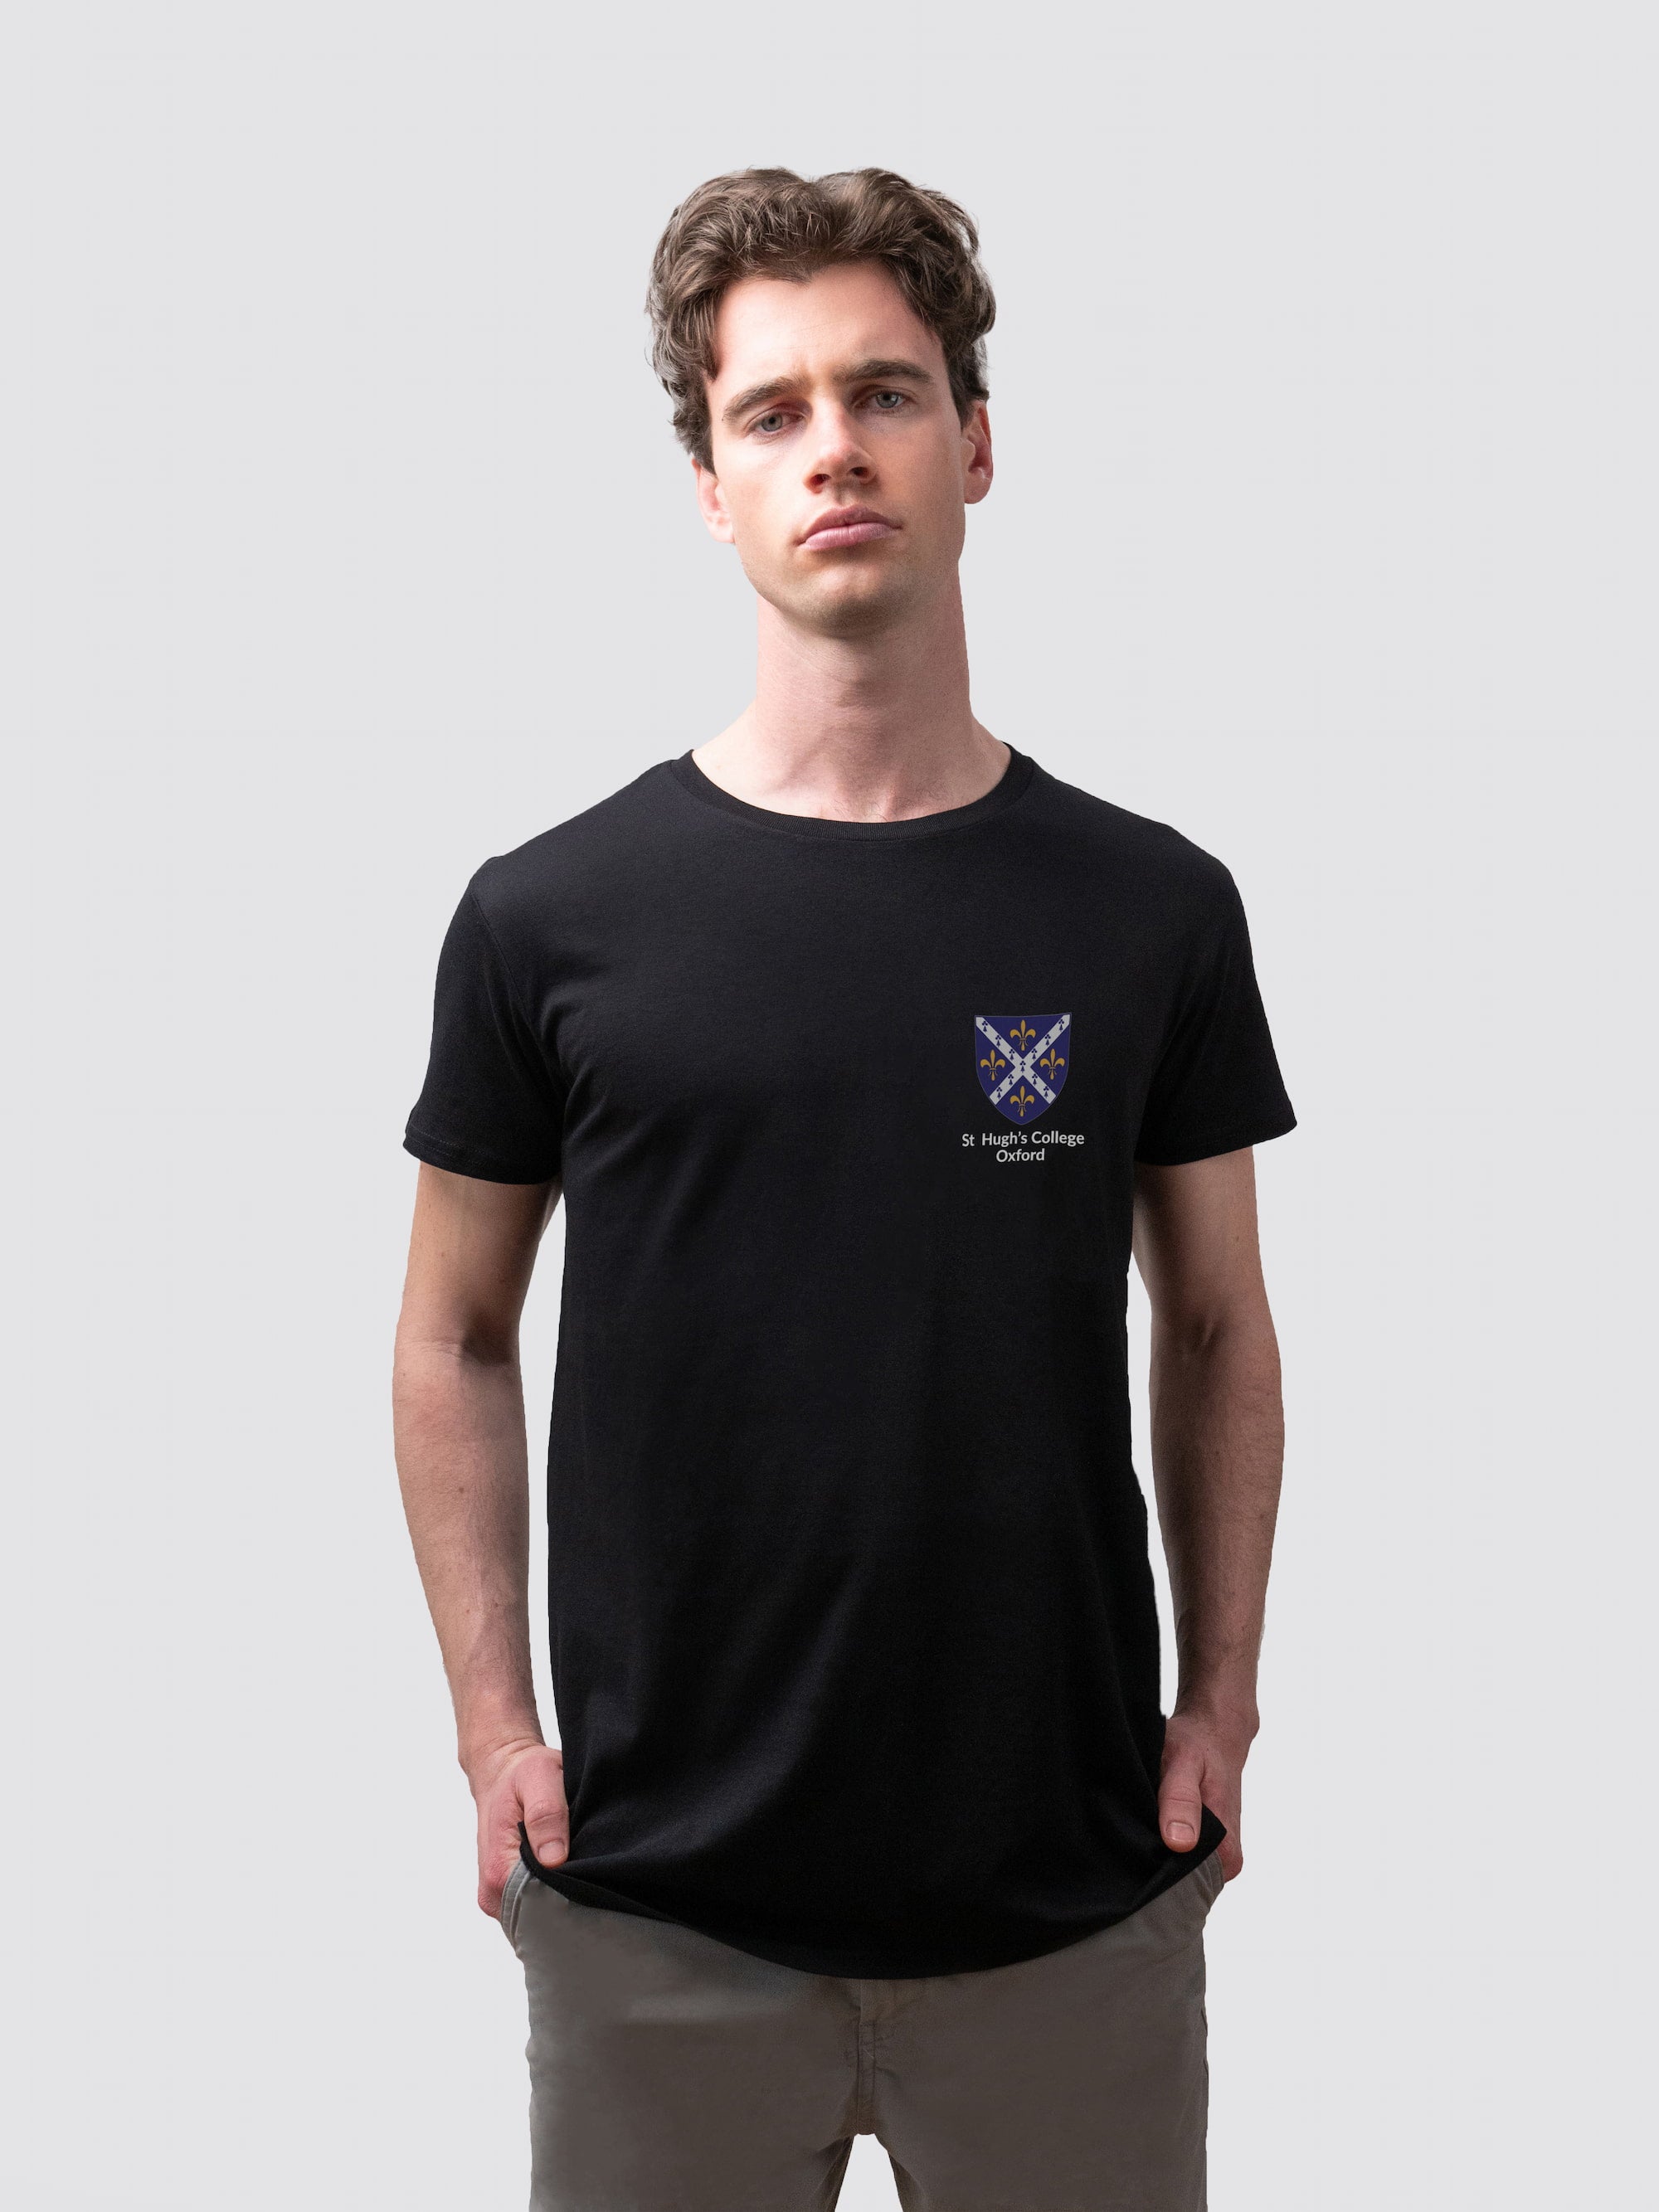 Sustainable St Hugh's t-shirt, made from organic cotton